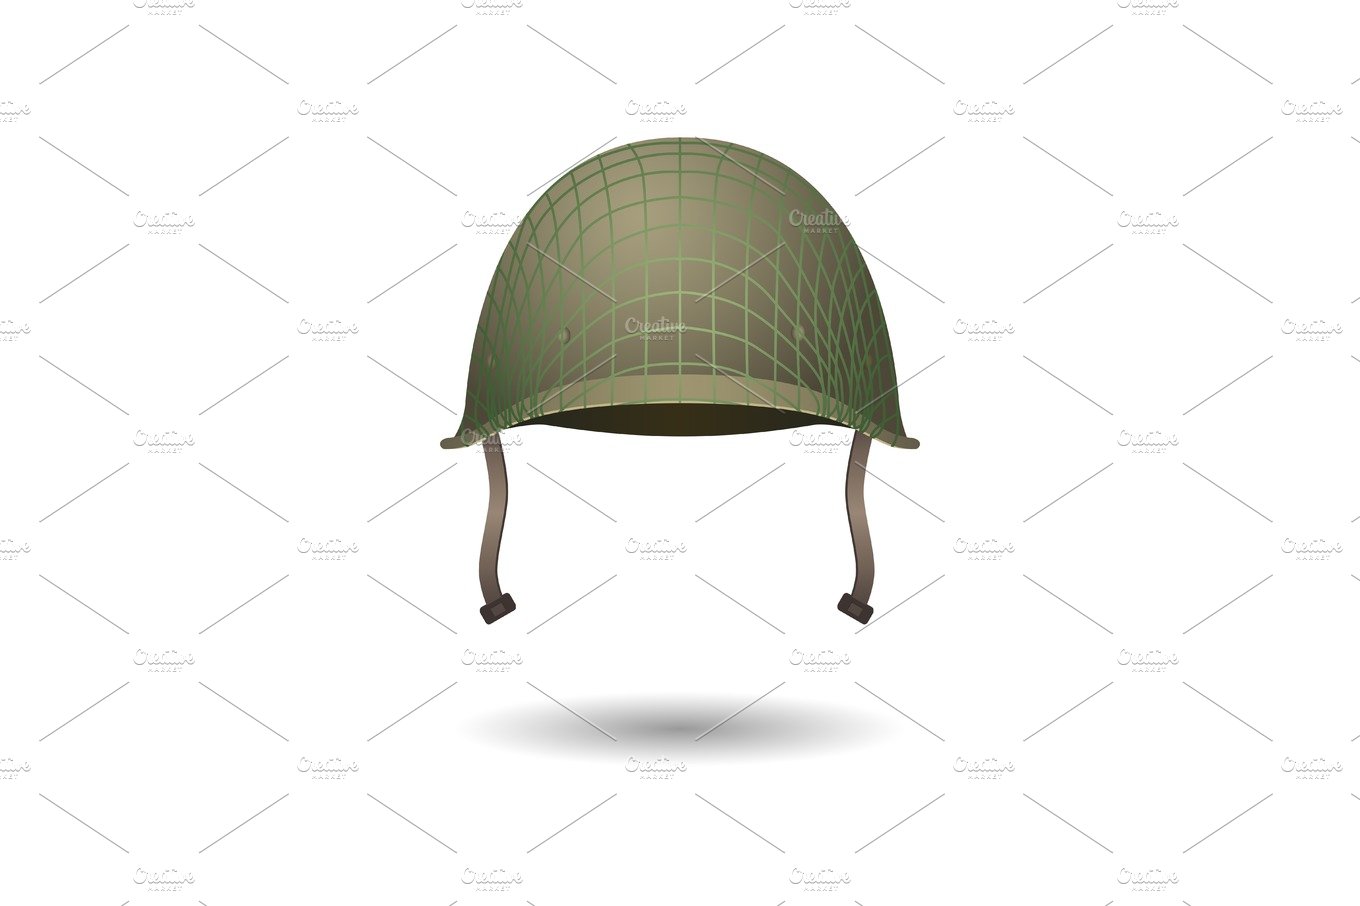 Military classical helmet design with projection lines. Development of uniform cover image.